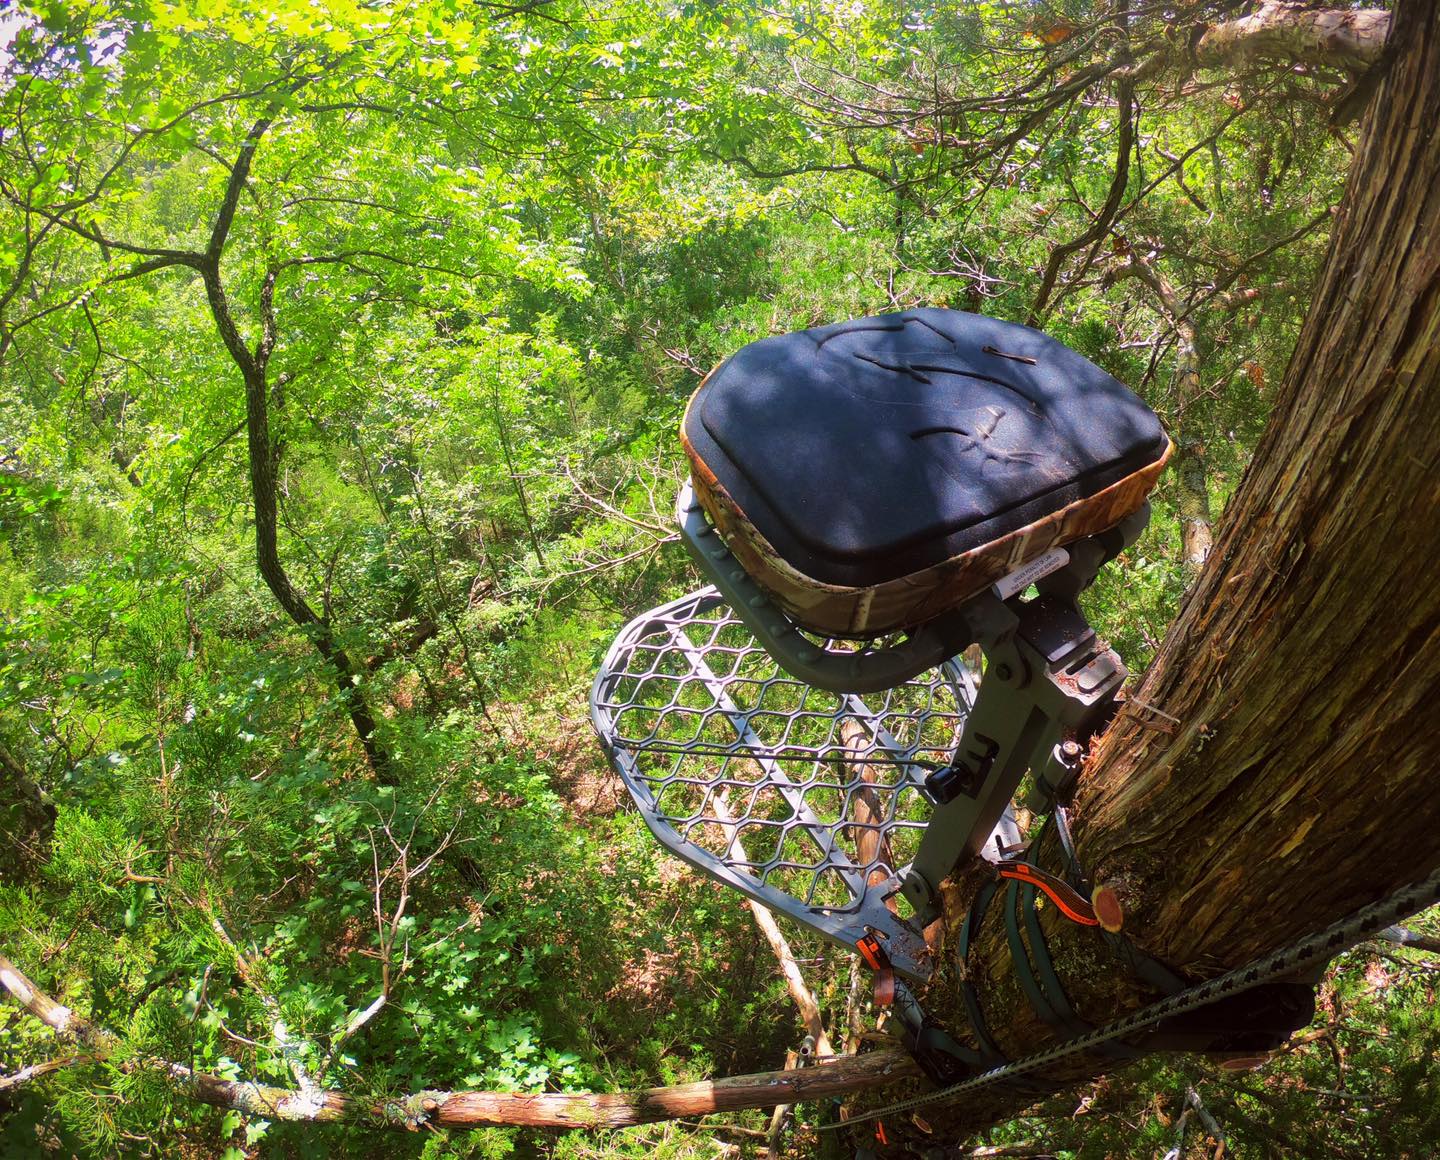 Summit Stand in a Treestand July 2020